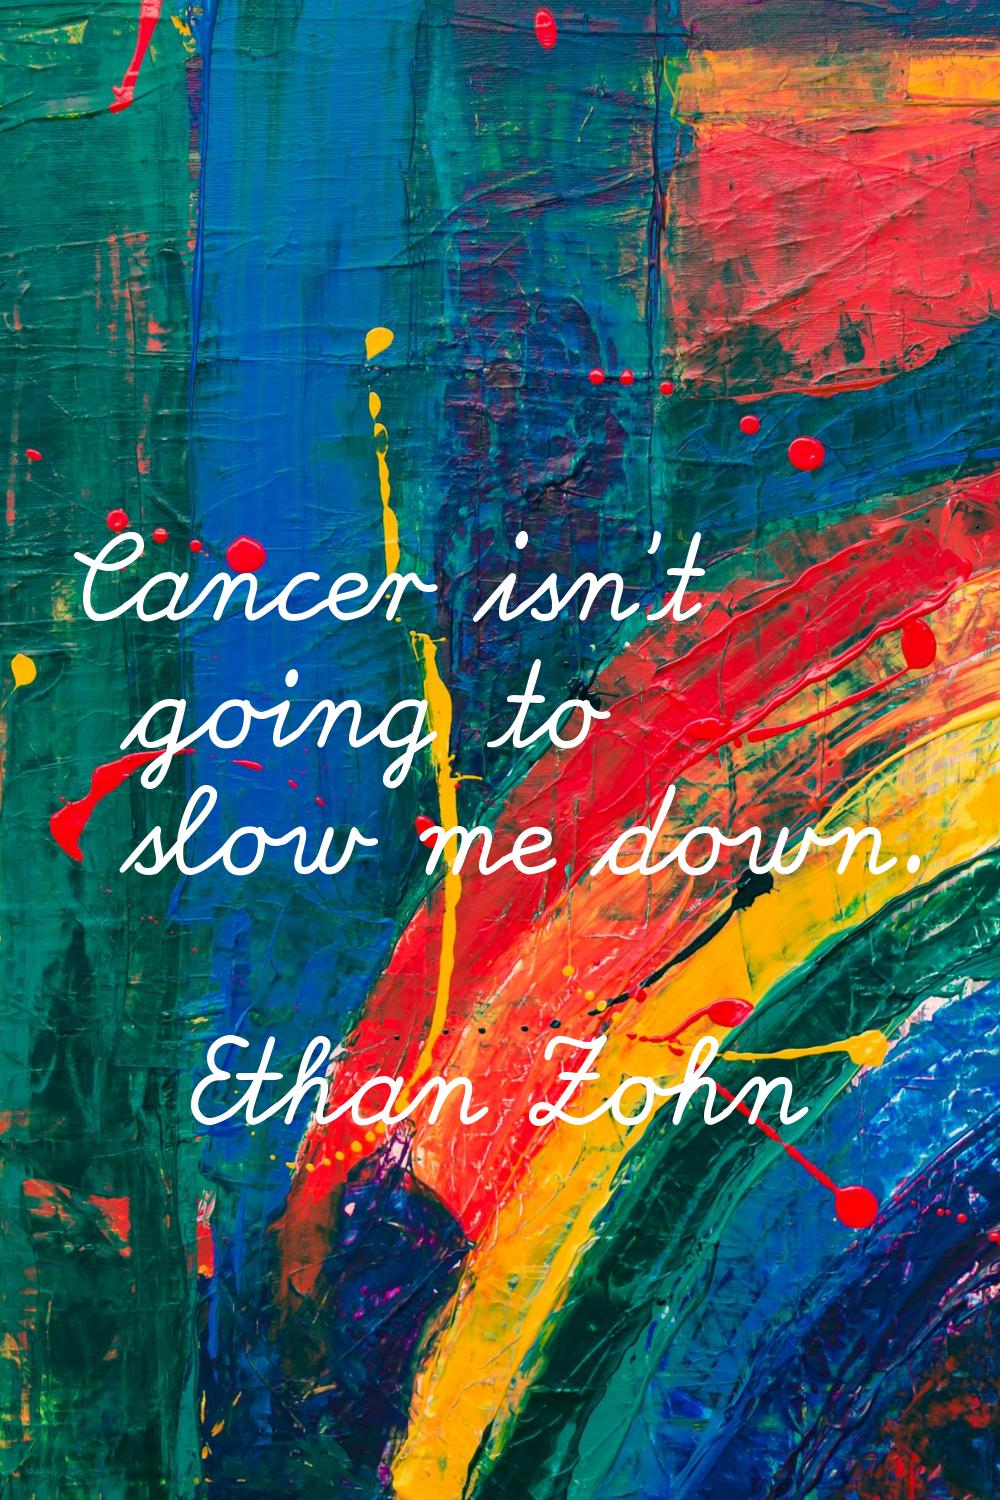 Cancer isn't going to slow me down.